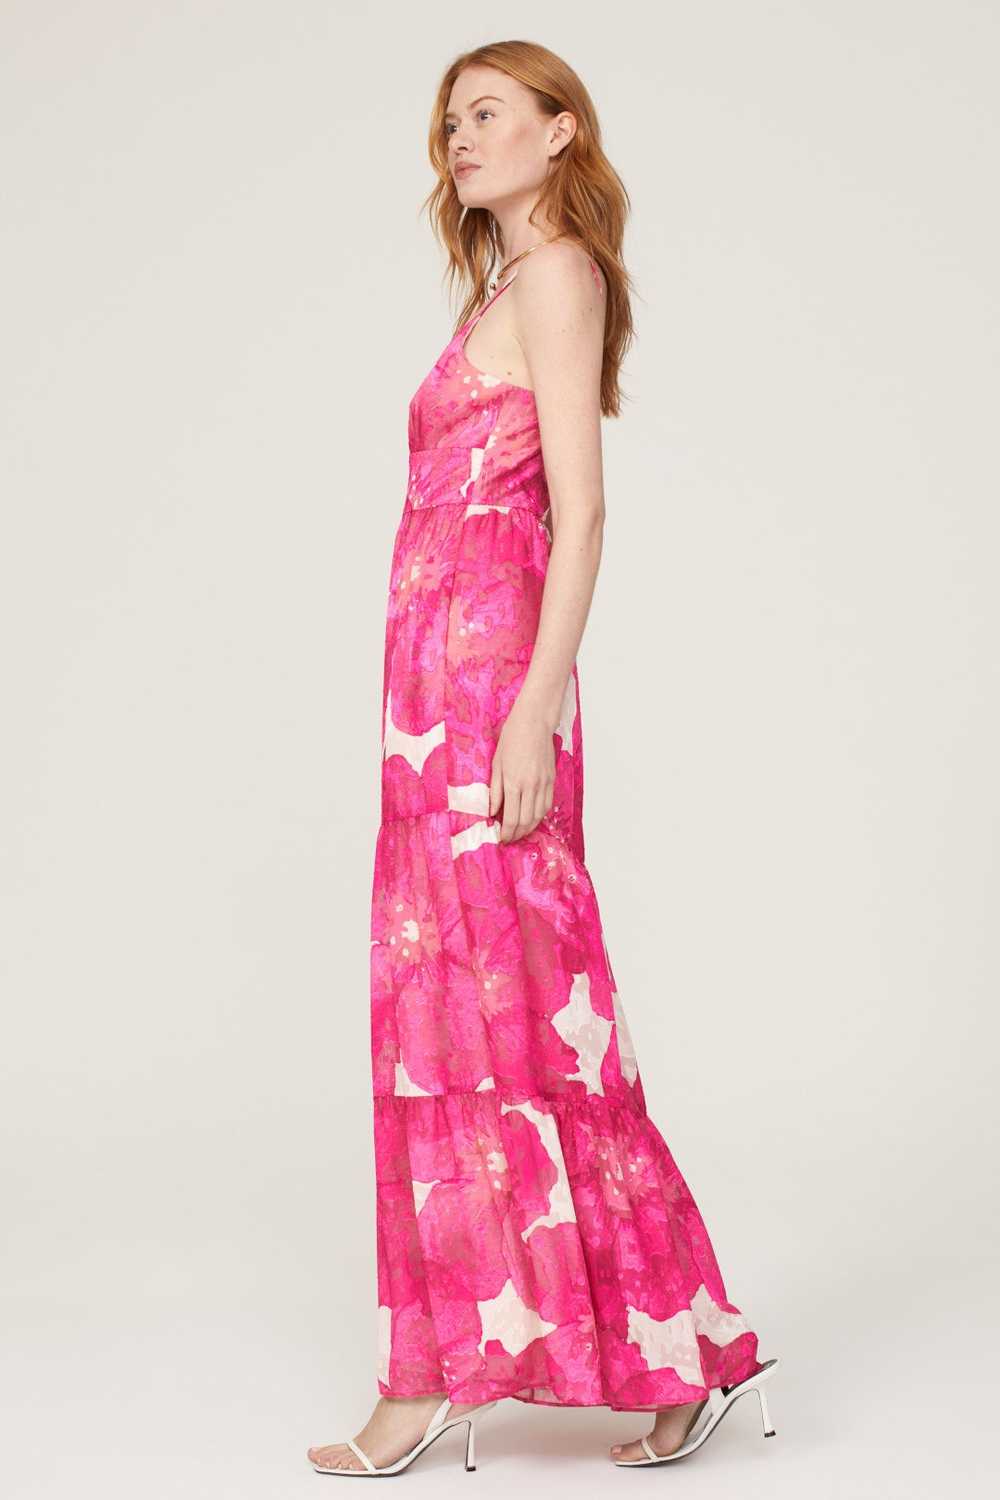 Slate & Willow Pink Floral Jumpsuit - image 2